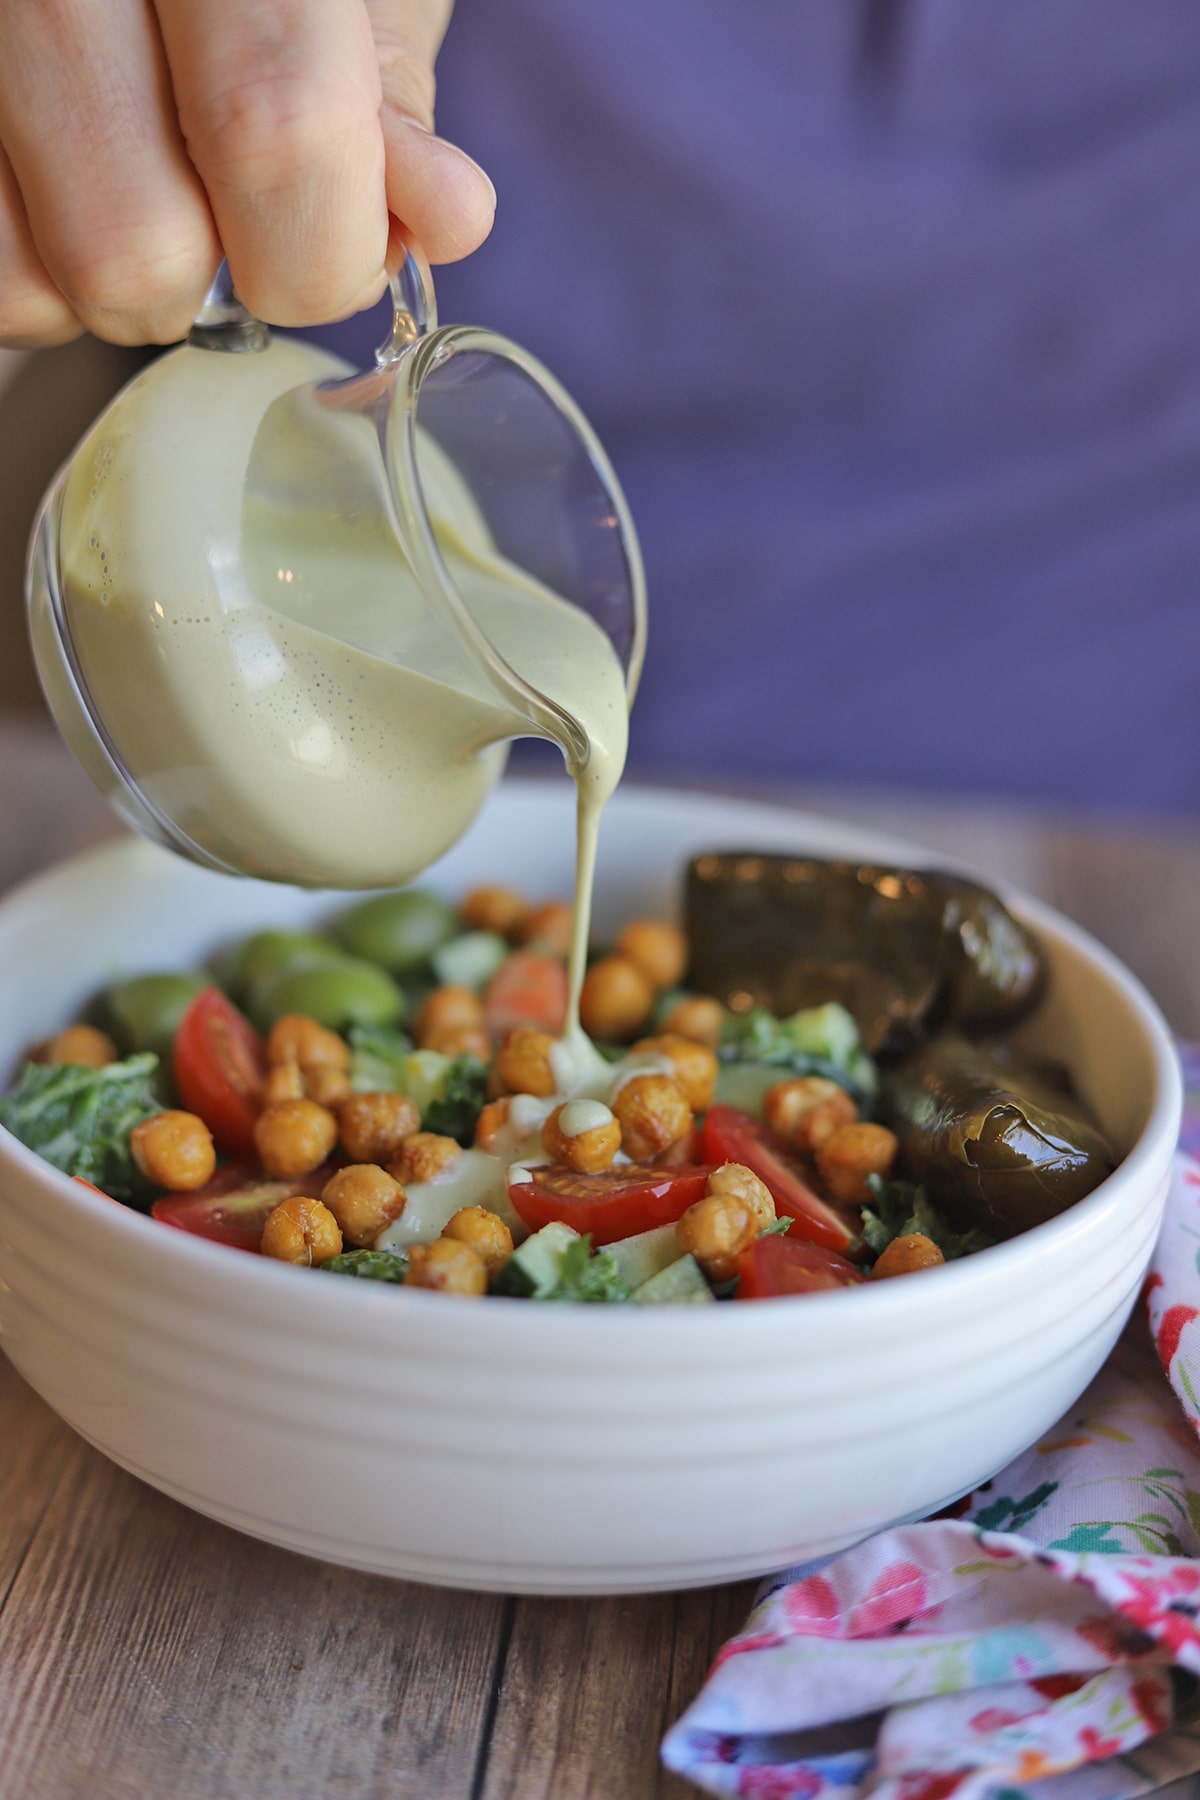 Creamy cashew dressing being poured onto kale salad.